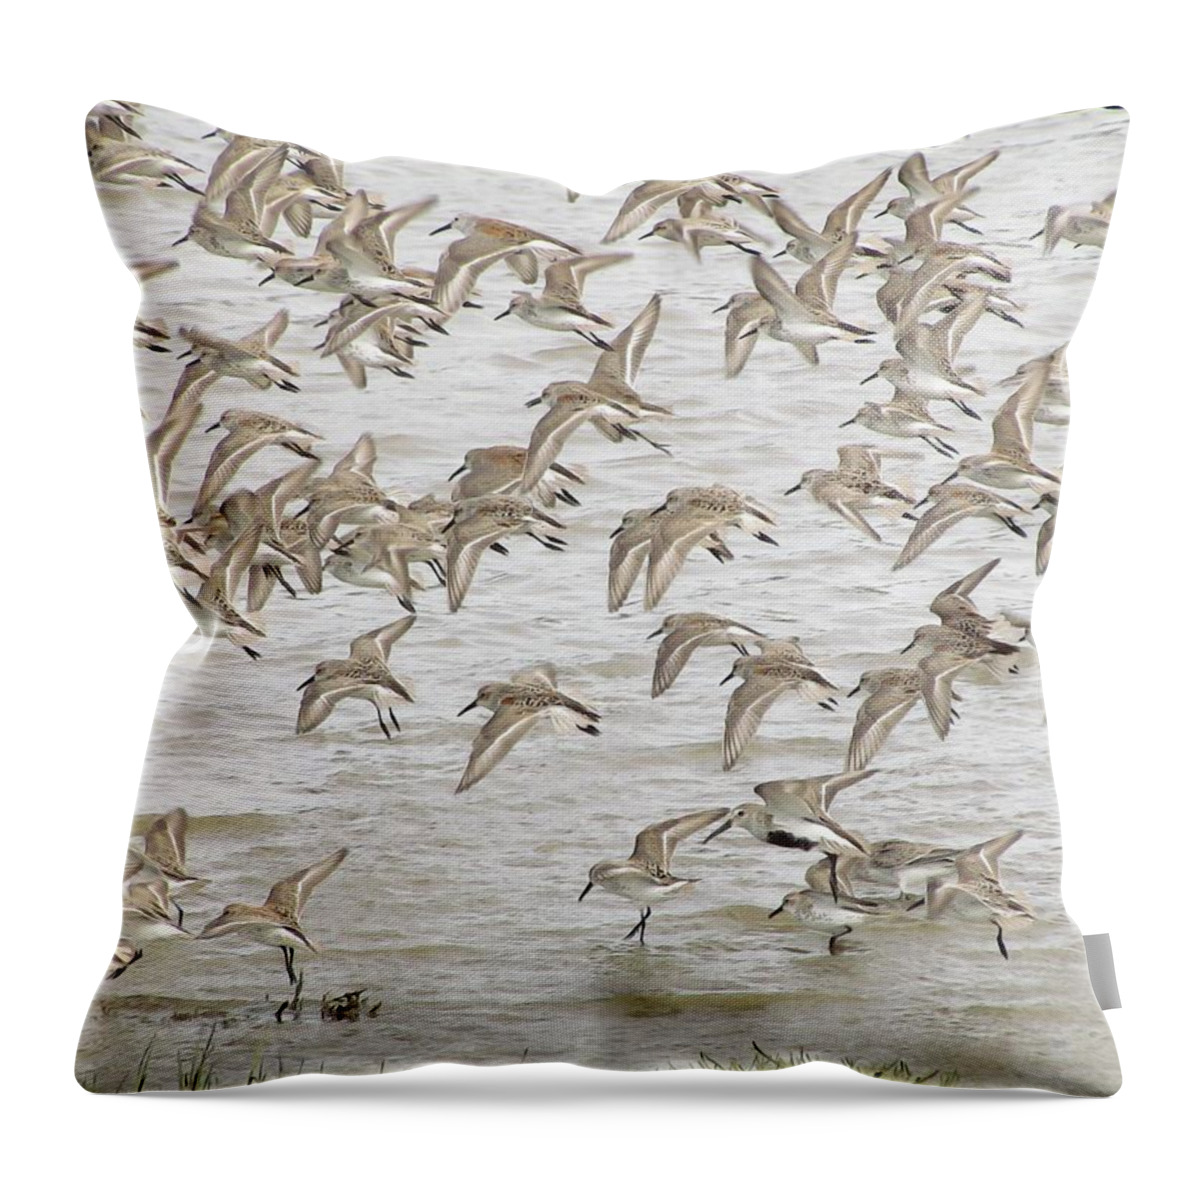 Nw Shorebirds Throw Pillow featuring the photograph Piping In Spring by I'ina Van Lawick